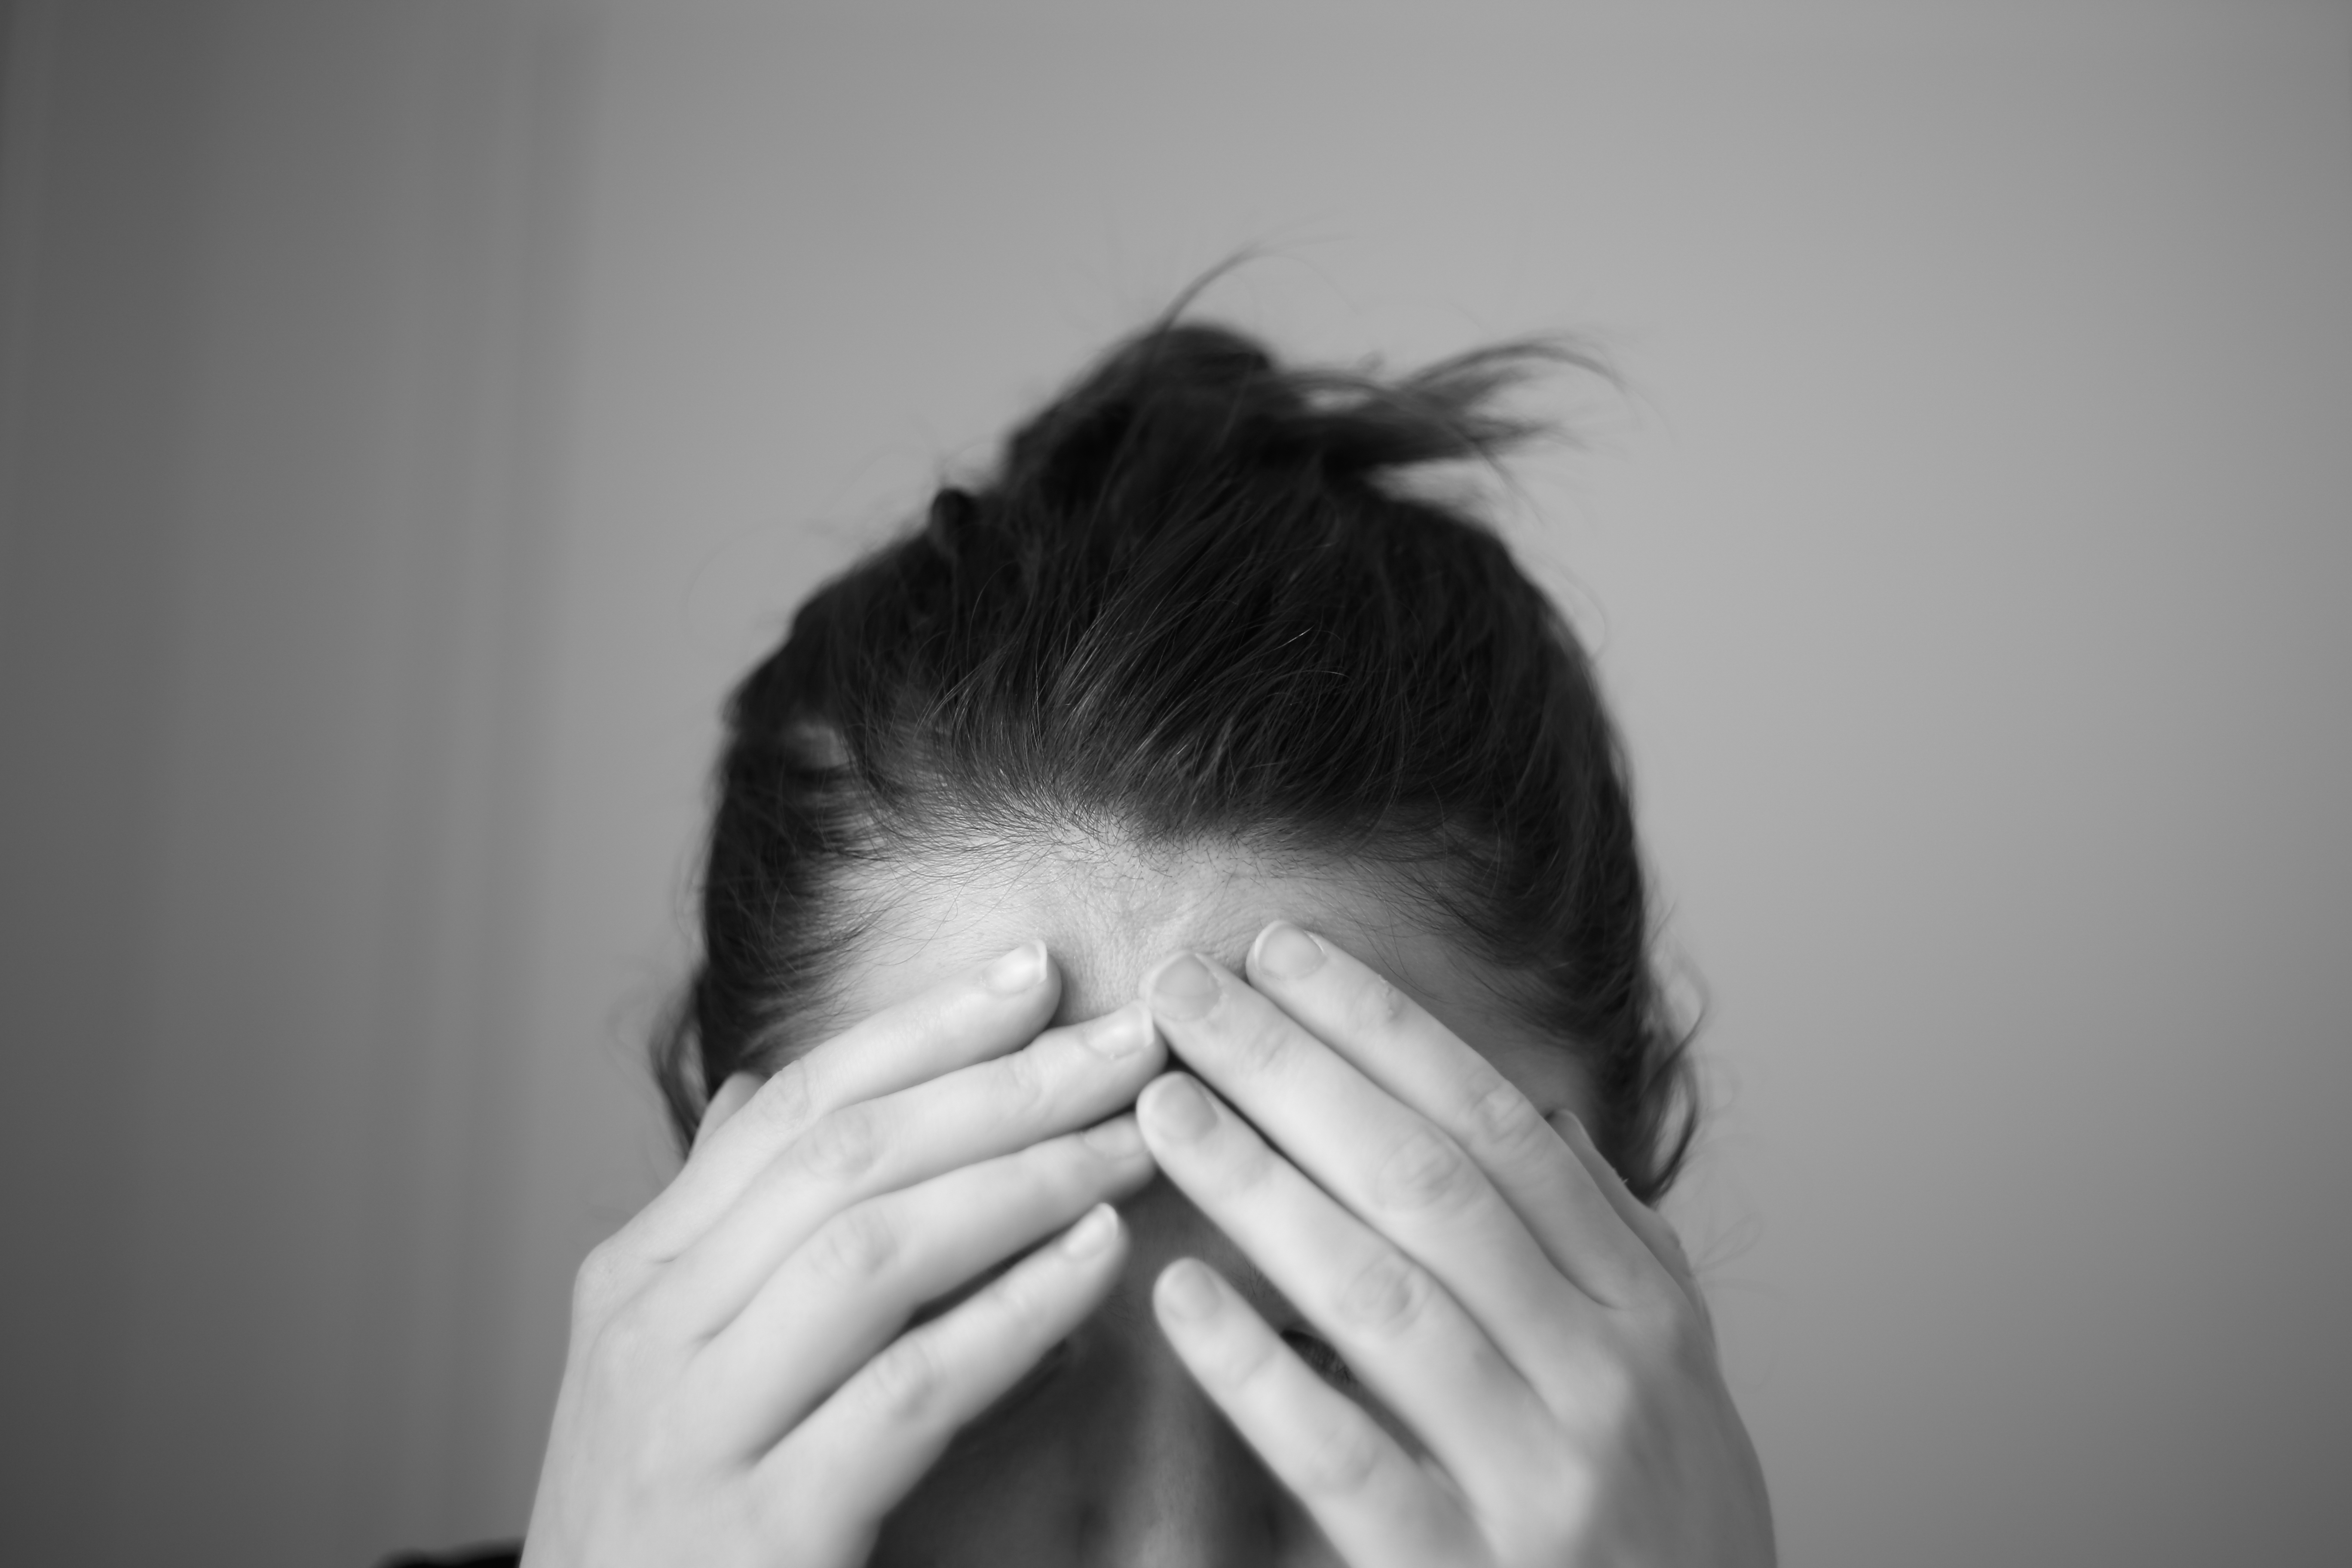 A black and white photo of a woman covering her face with her hands